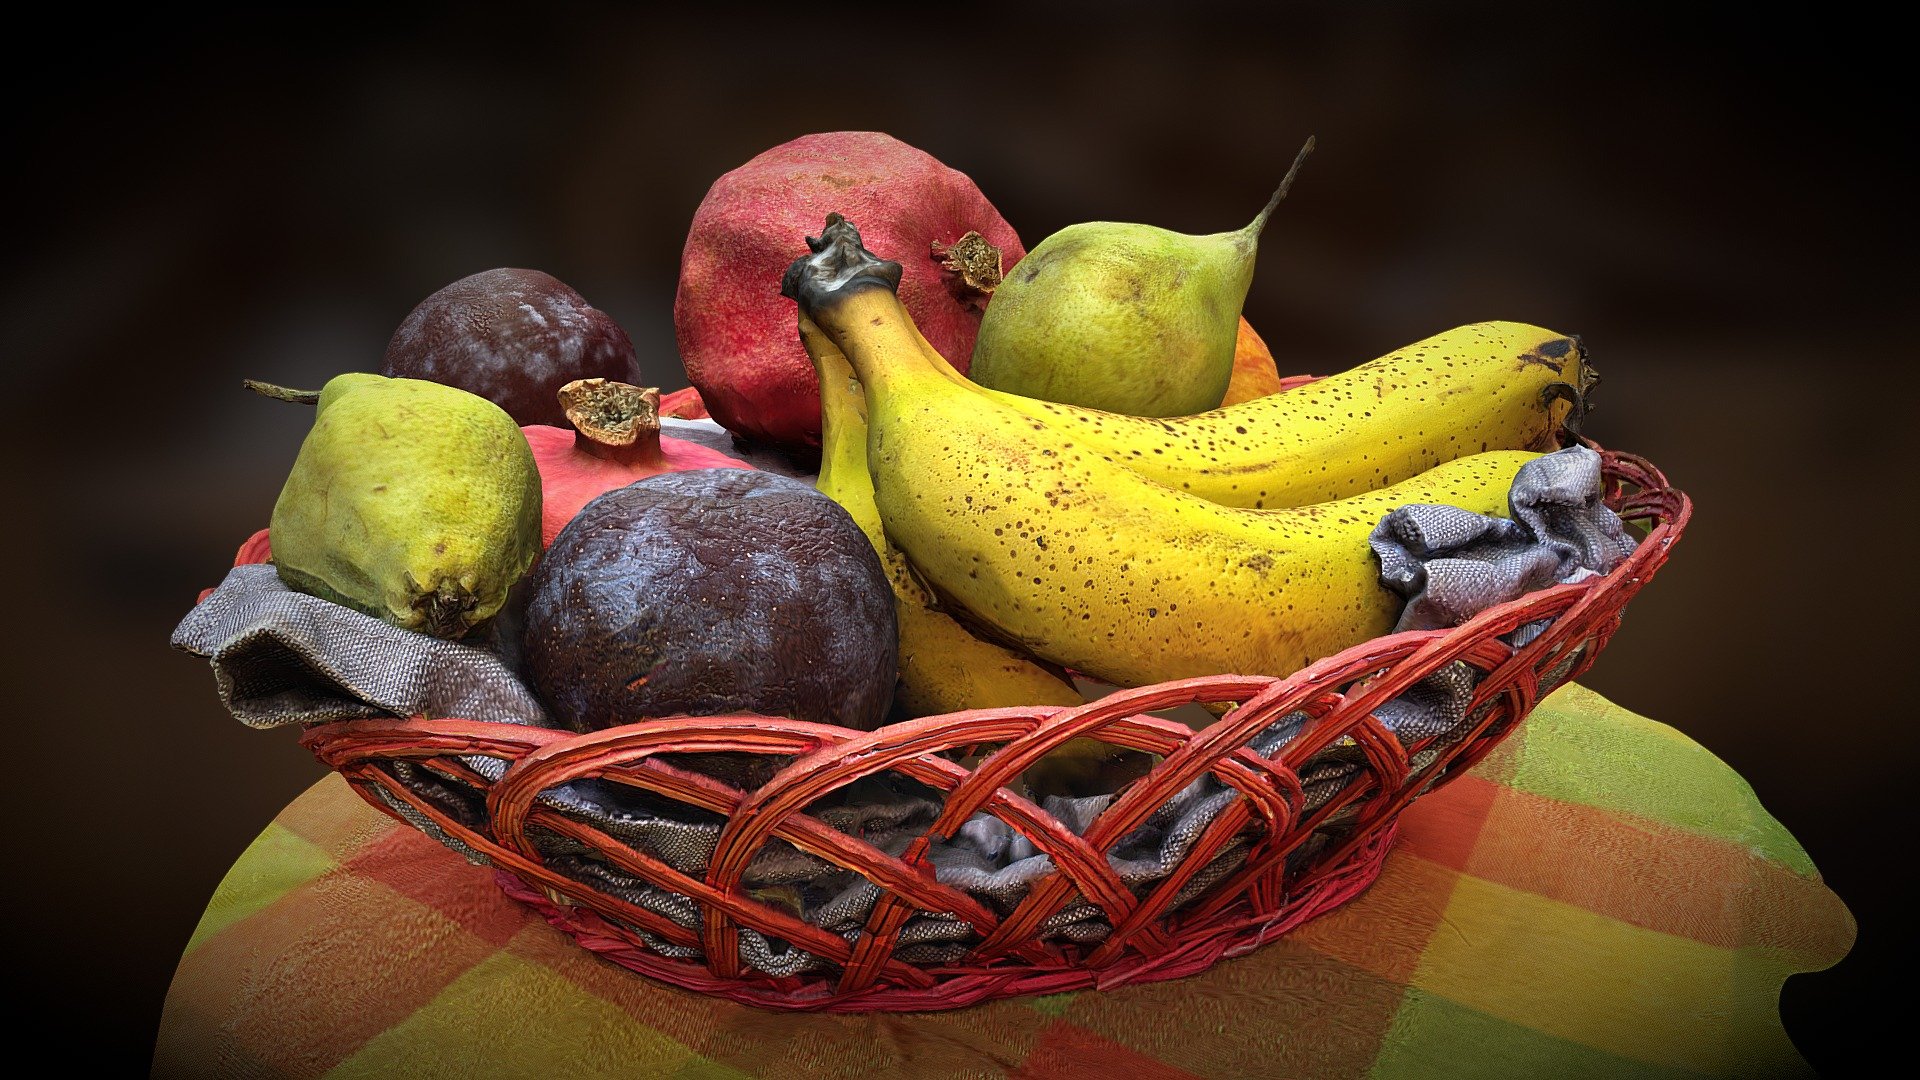 Decaying Fruit Basket - Fruit Decay - Download Free 3D model by Moshe Caine (@moshecaine) 3d model